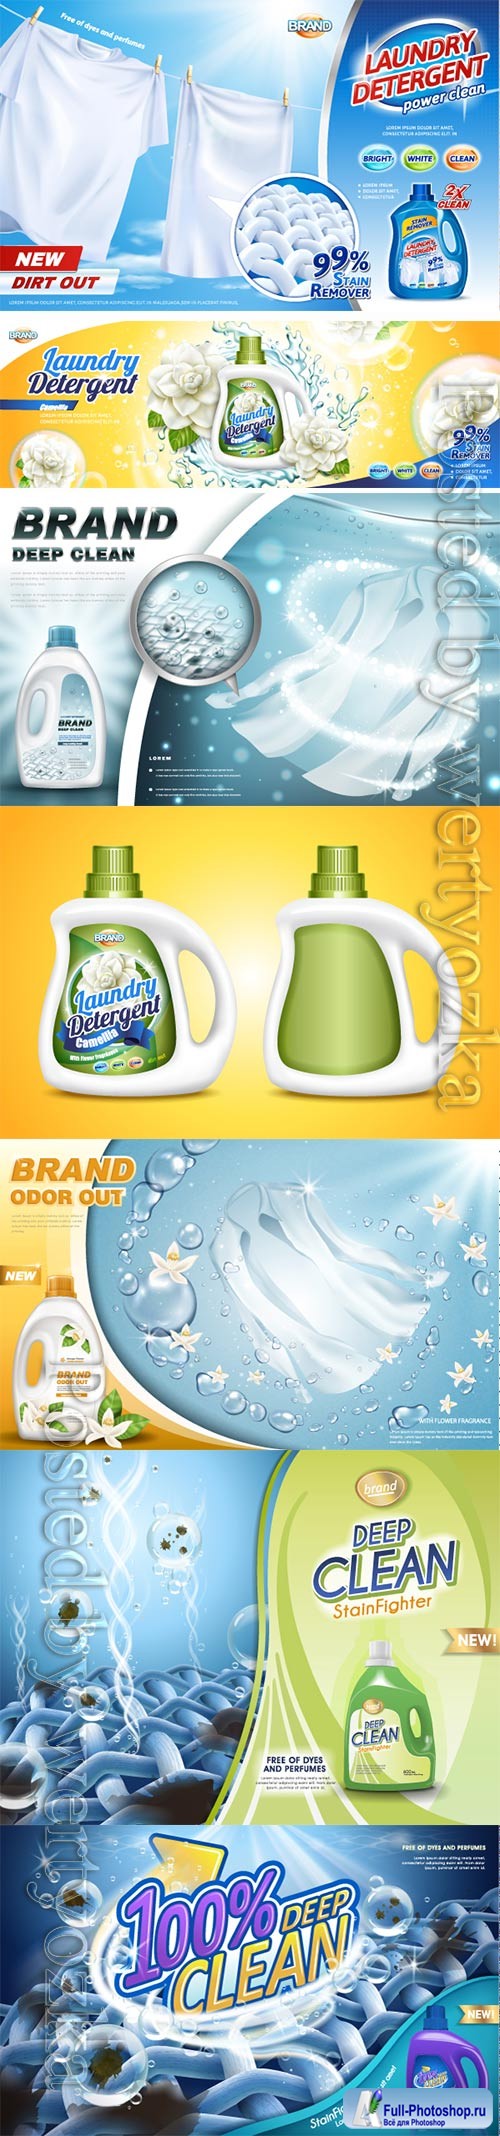 Laundry detergent ads vector collection